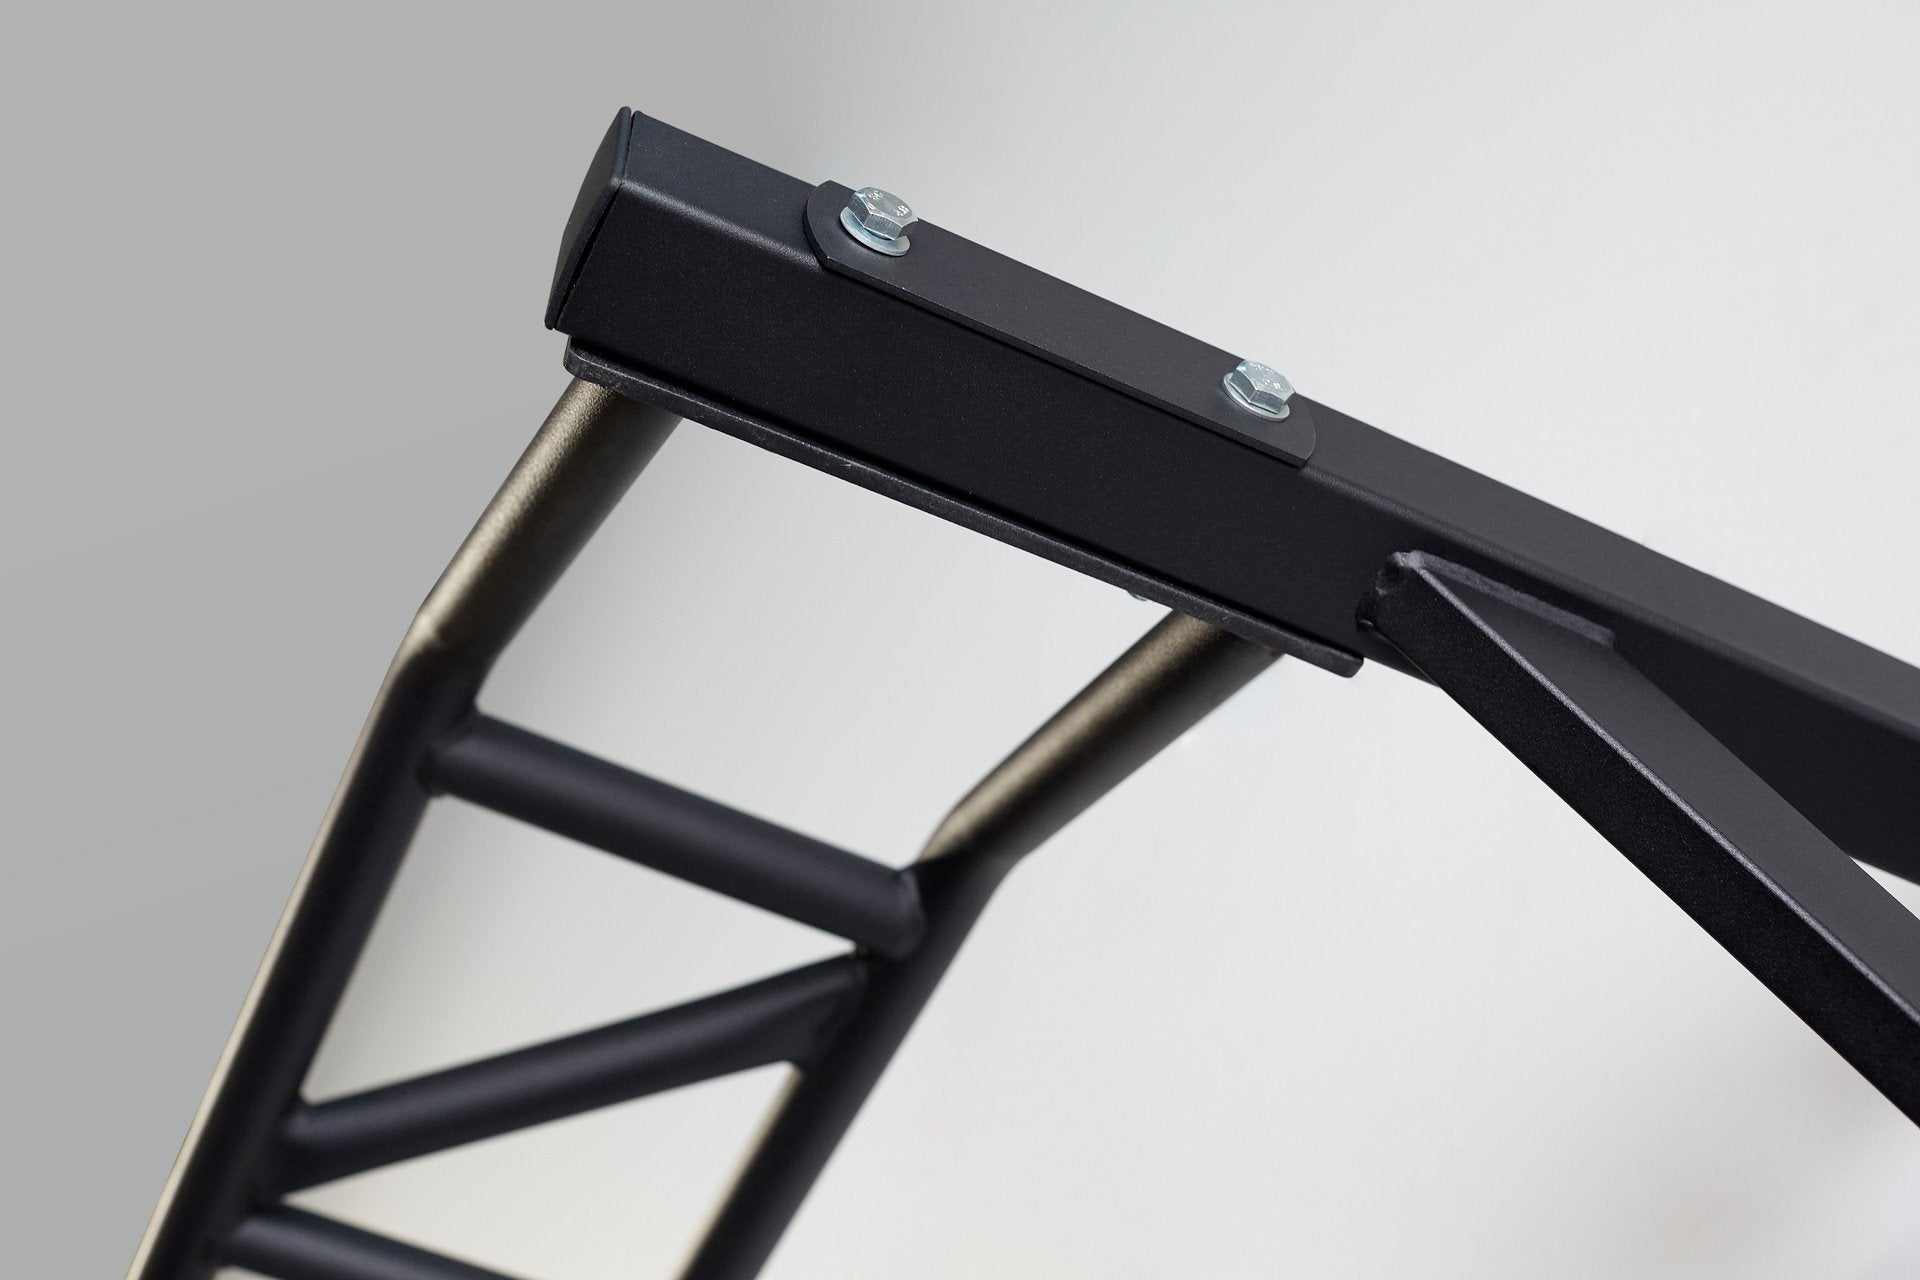 Close-up view of where the multi-grip pull-up bar attaches to the right side support post.